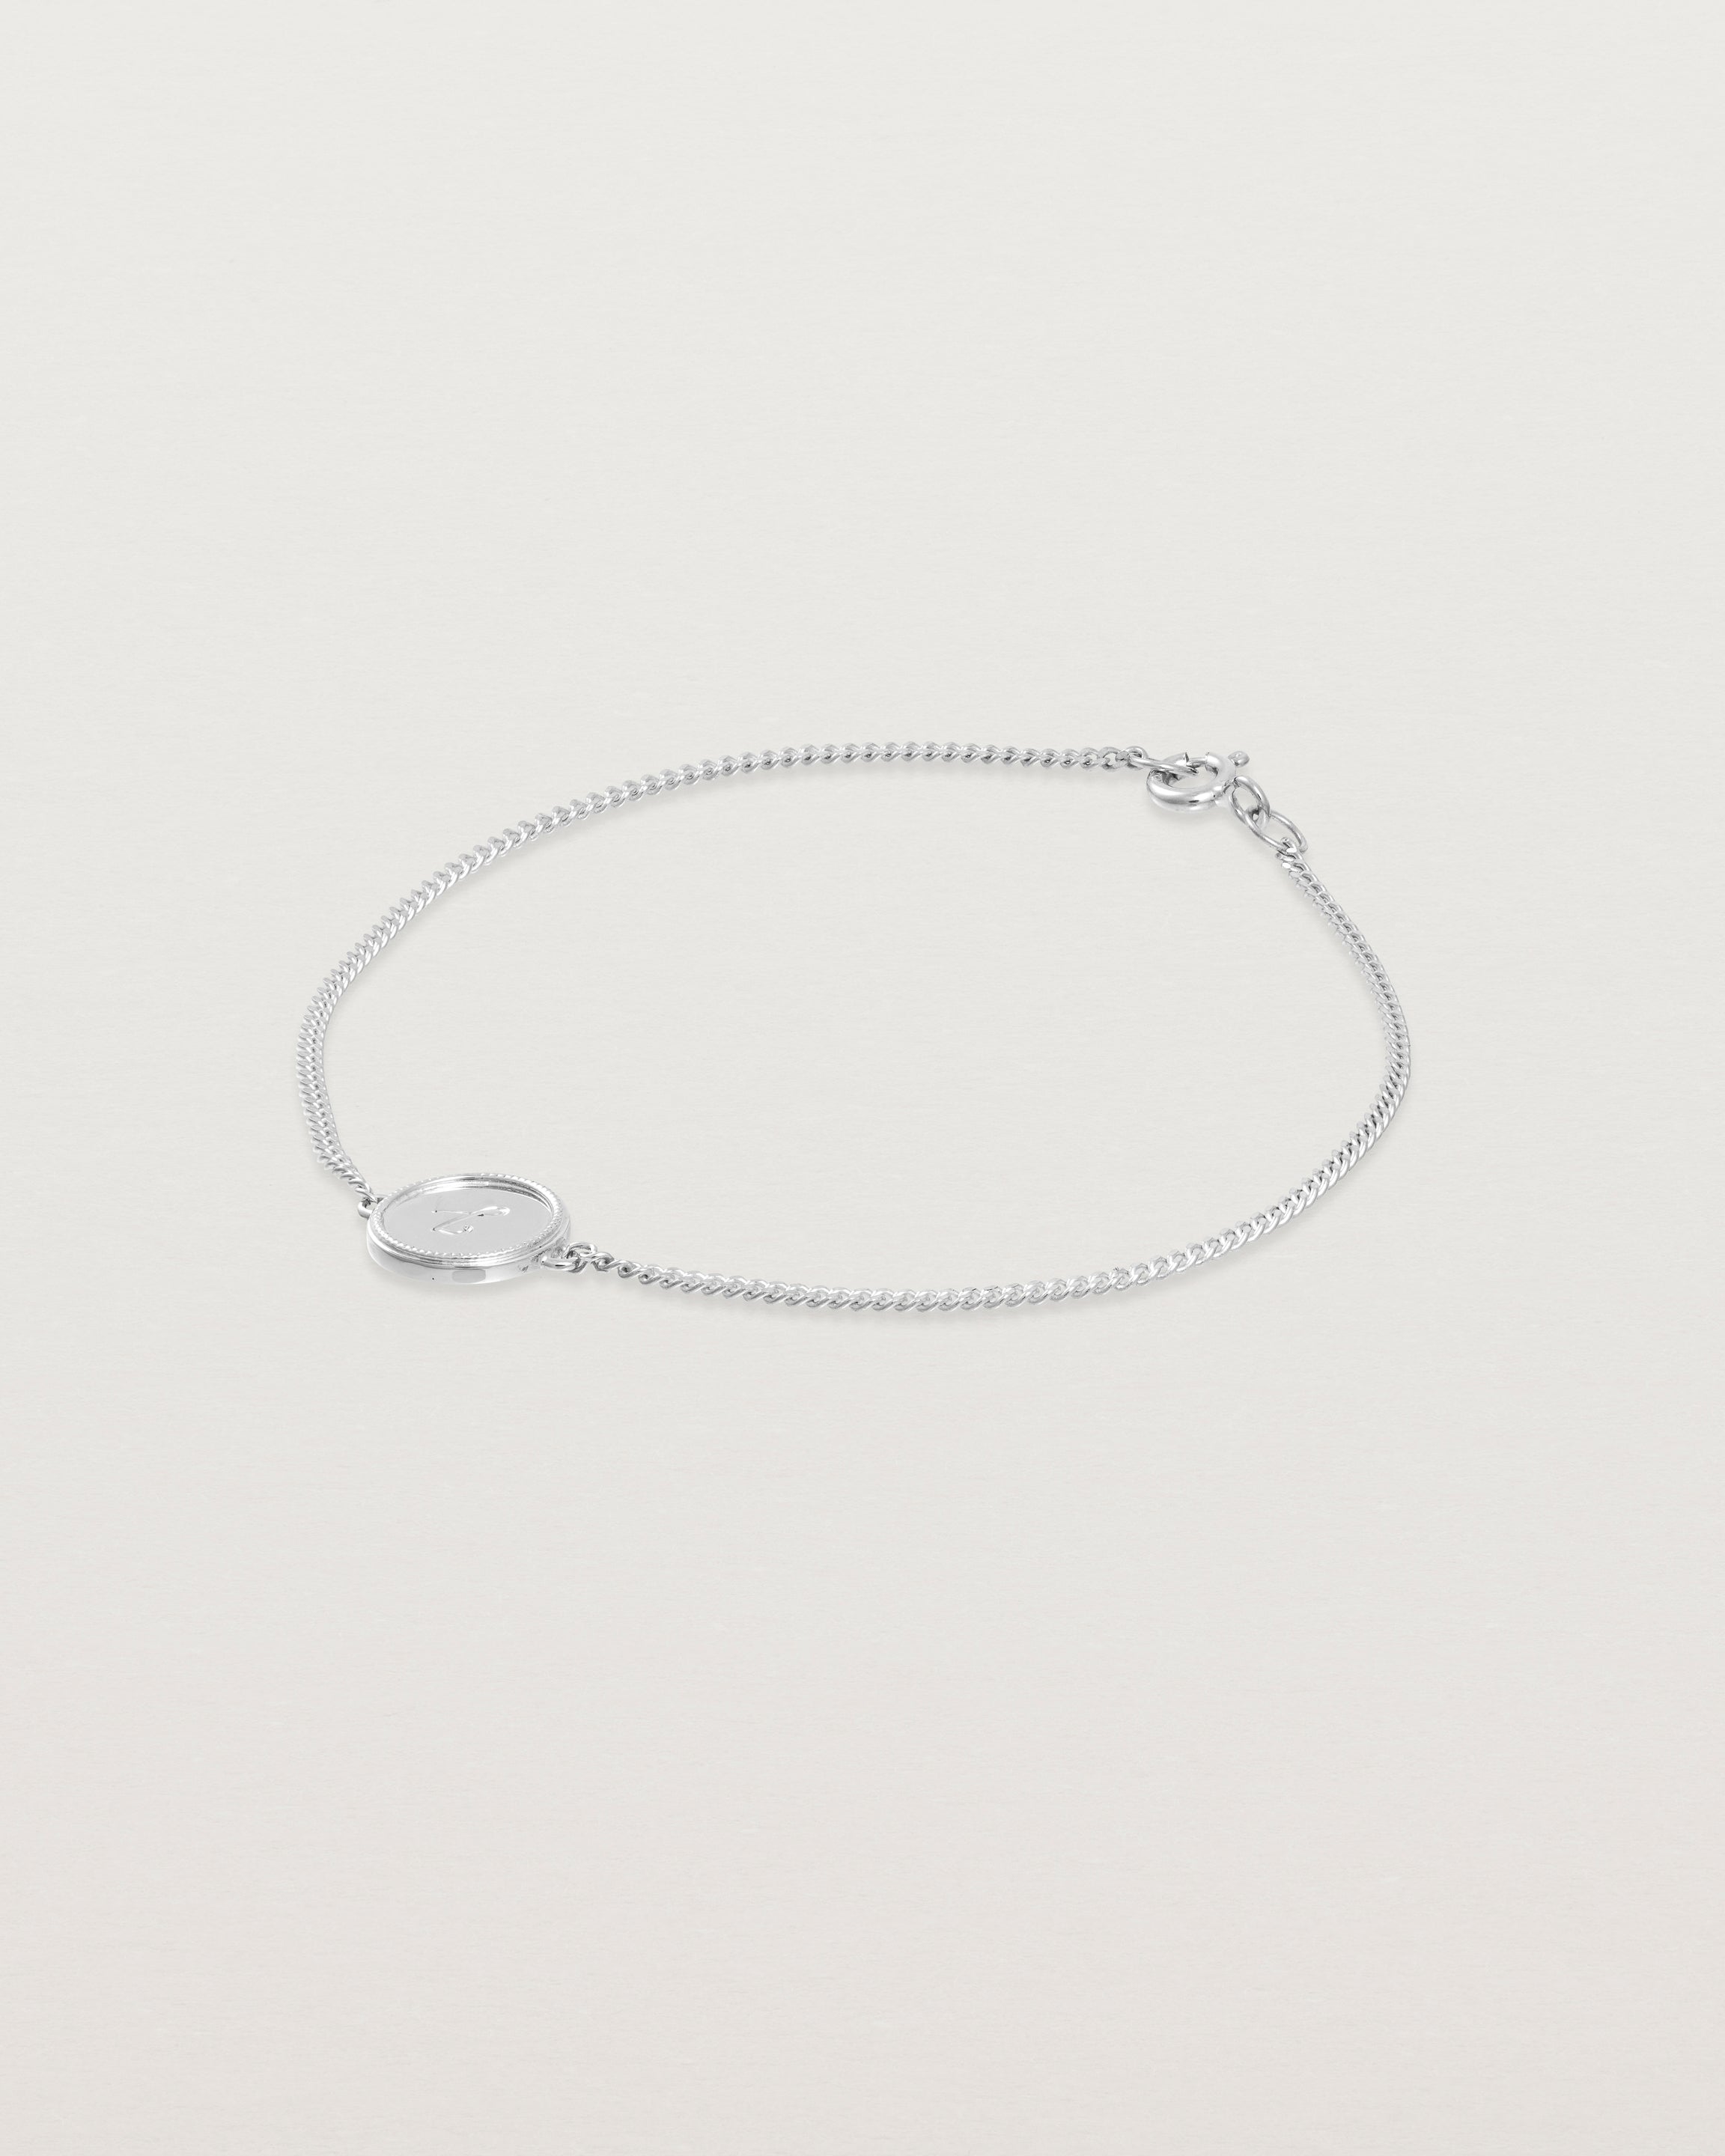 Angled view of the Precious Initial Bracelet in white gold.